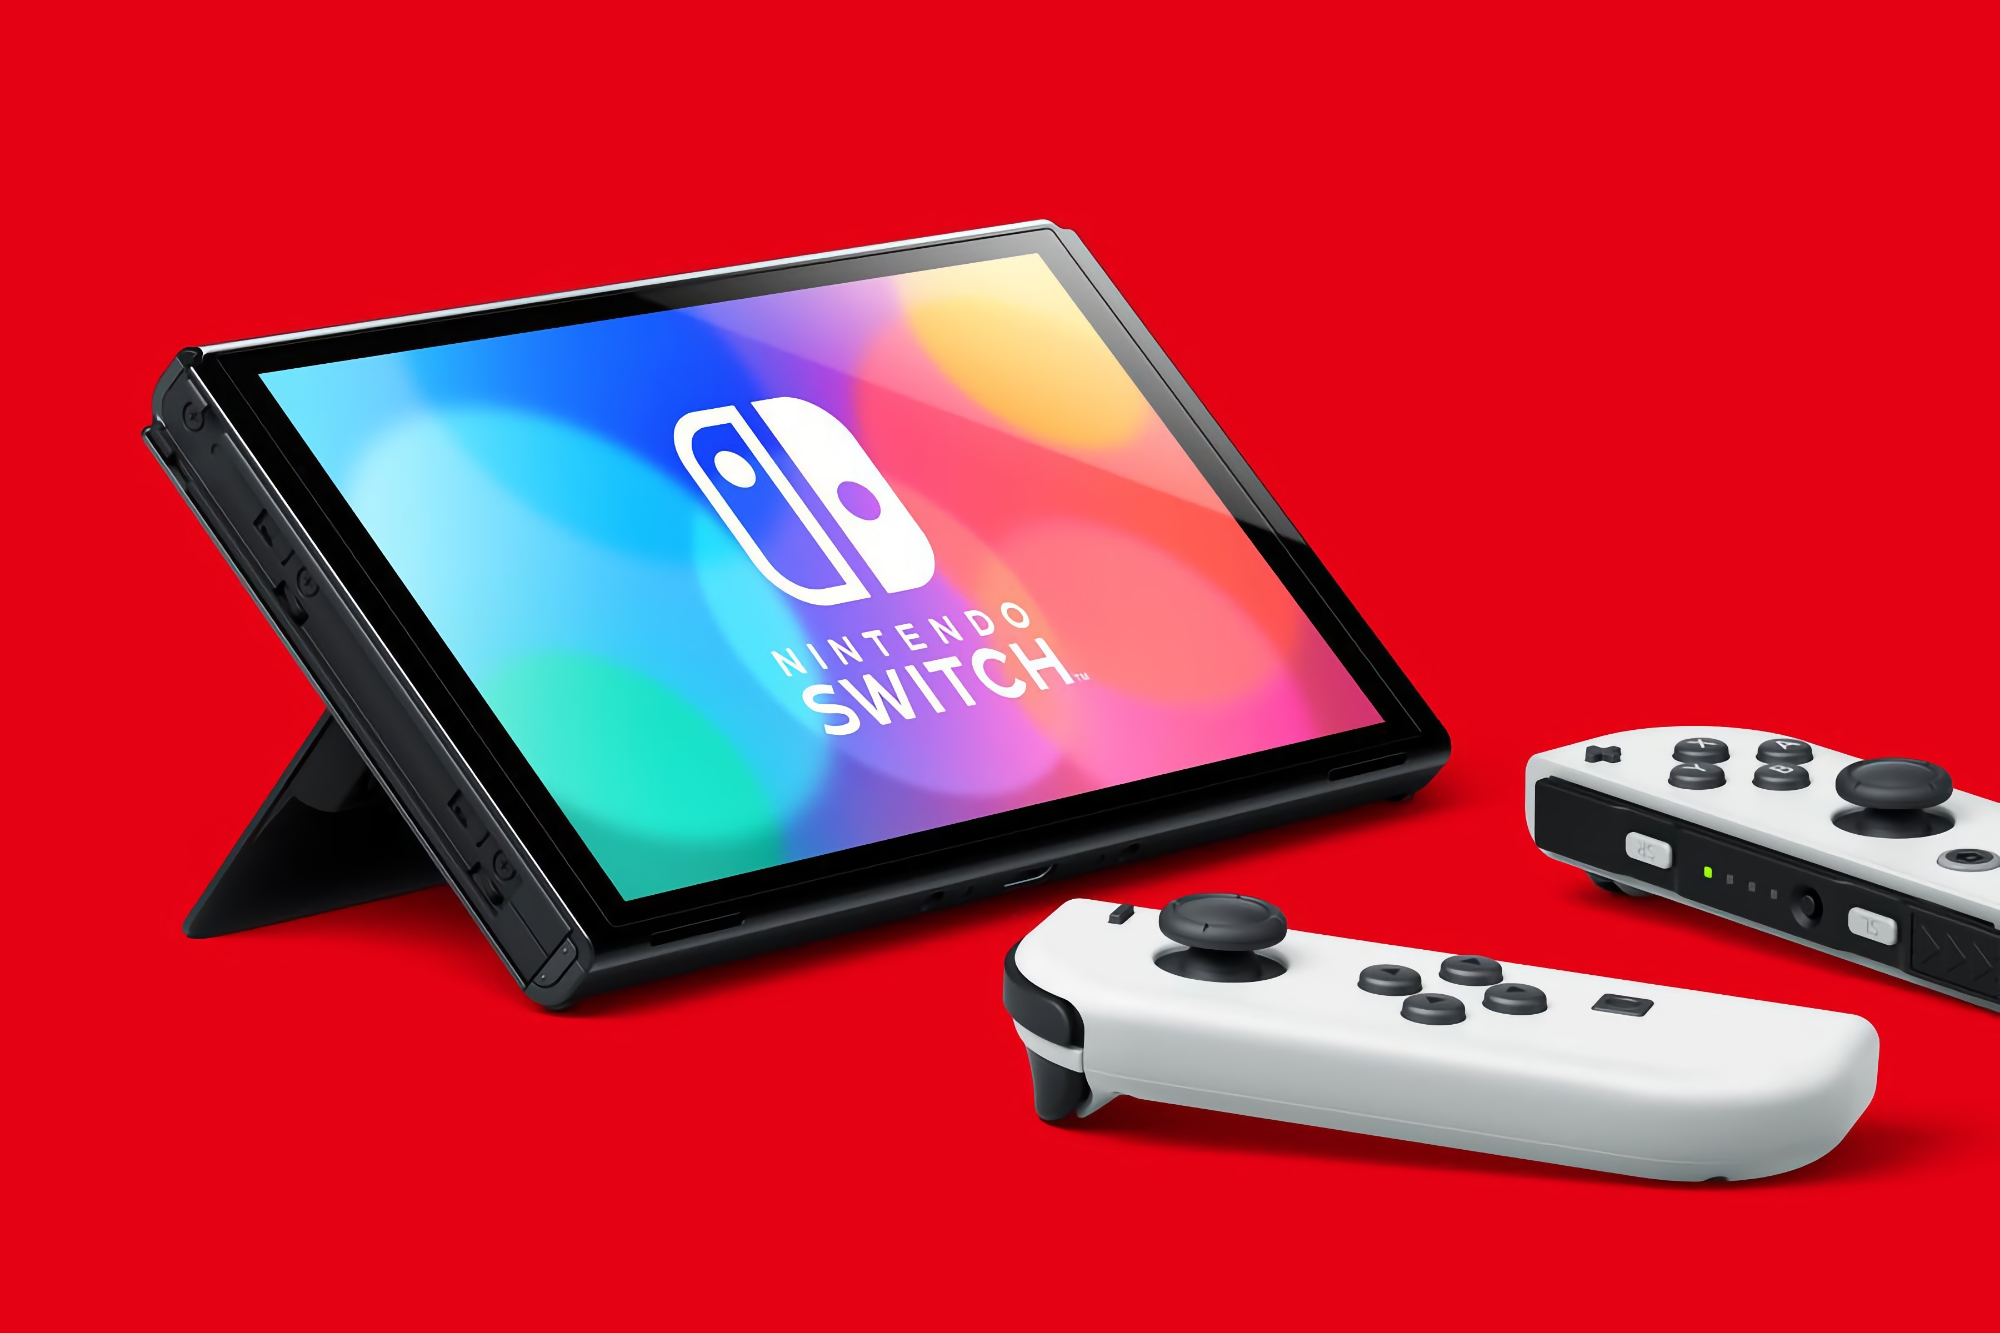 Nintendo has no plans for Nintendo Switch price cuts